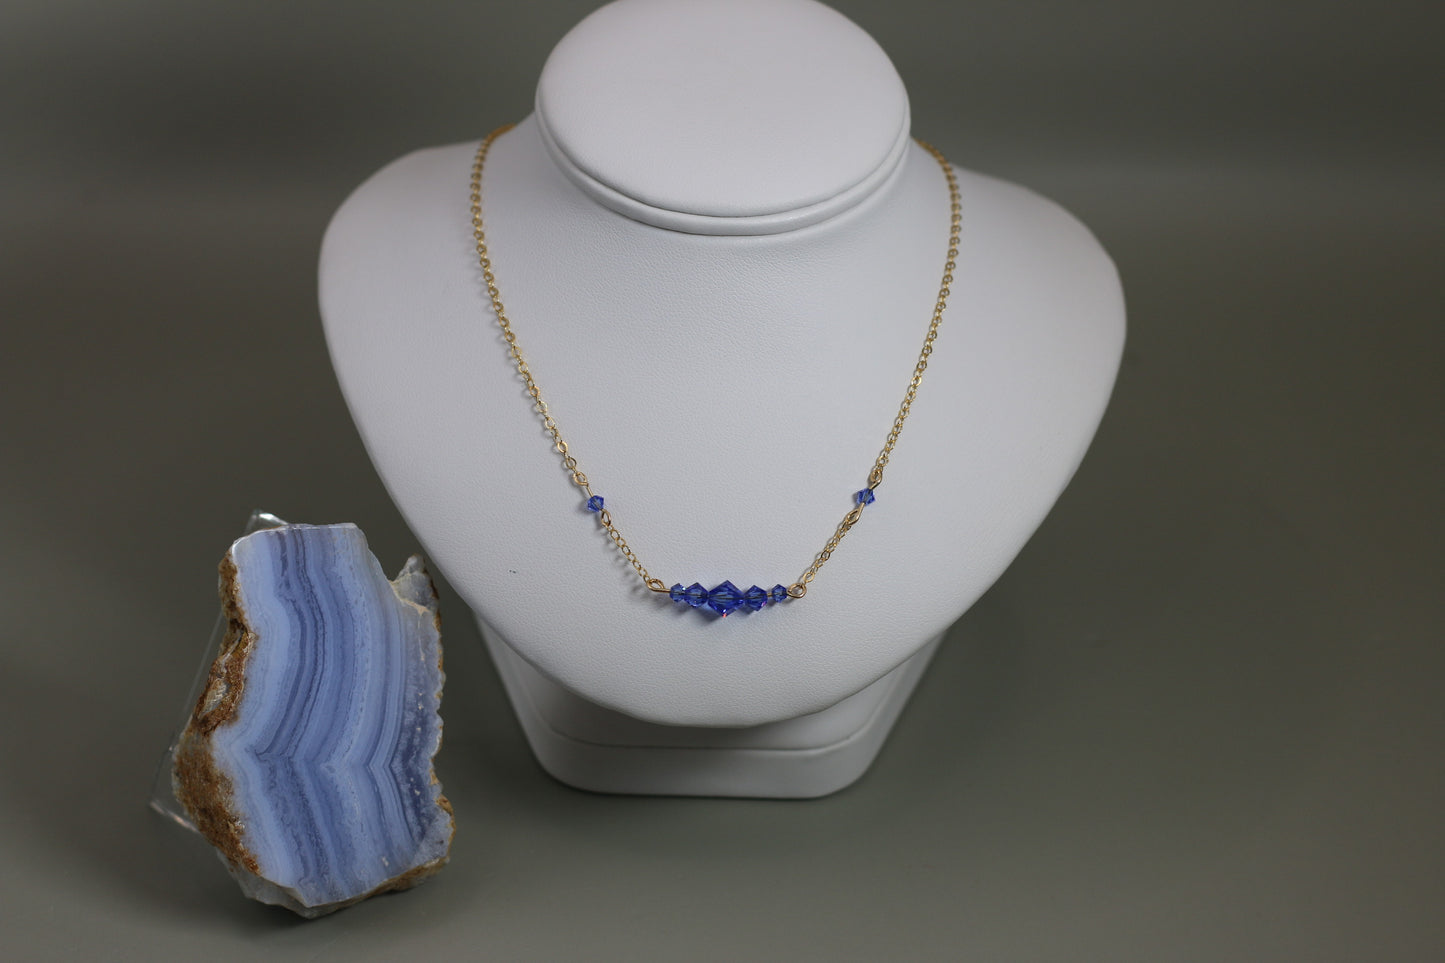 Sapphire Blue Austrian Crystals 18" Gold Filled Cable Chain Necklace and Components - Annabel's Jewelry & Leather